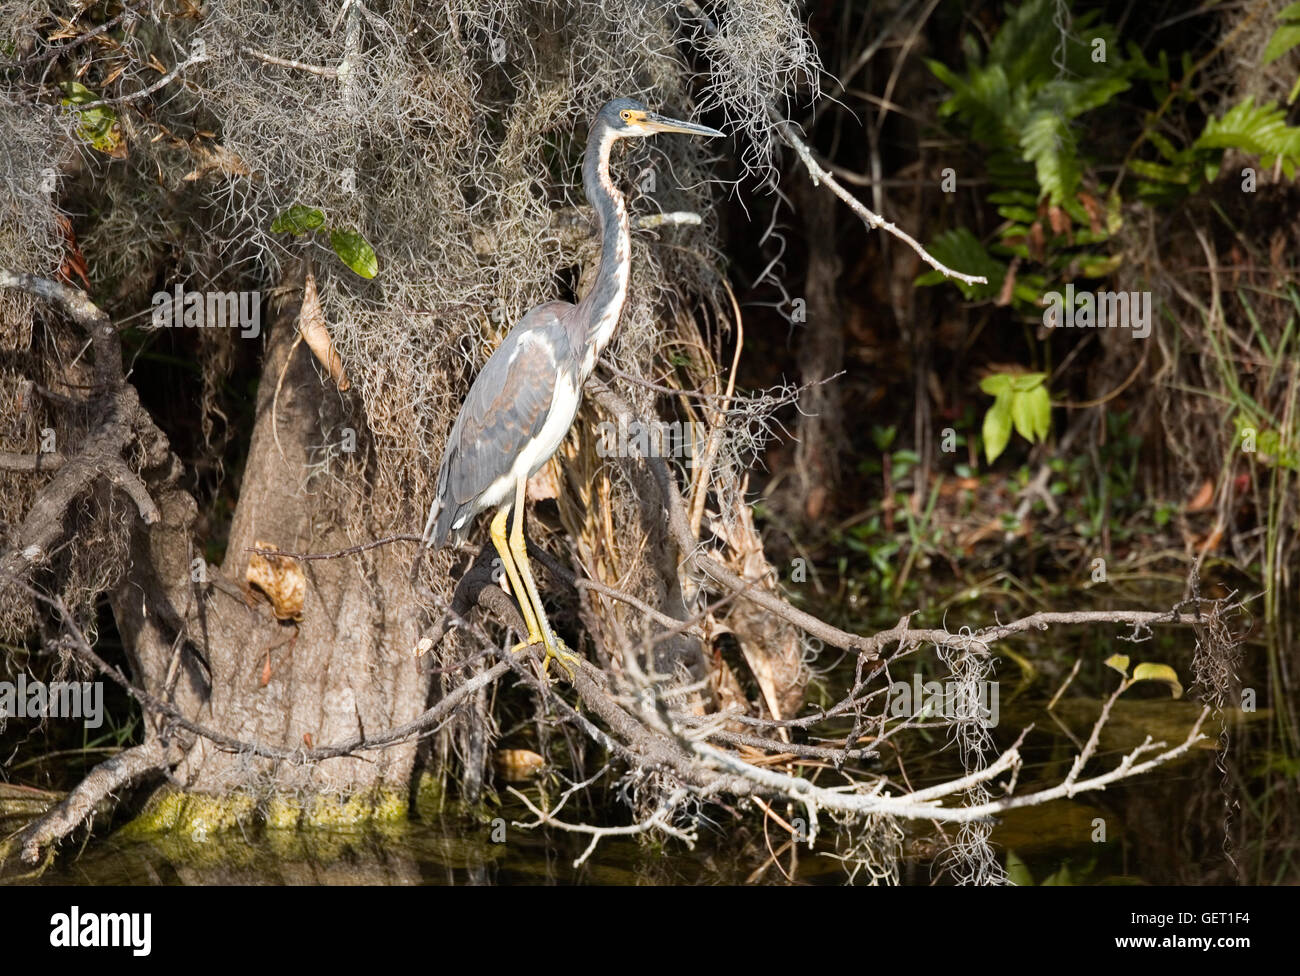 Tri-color Heron aka Louisiana Heron seems to complete the circle it makes with the branch it is perched upon. Stock Photo